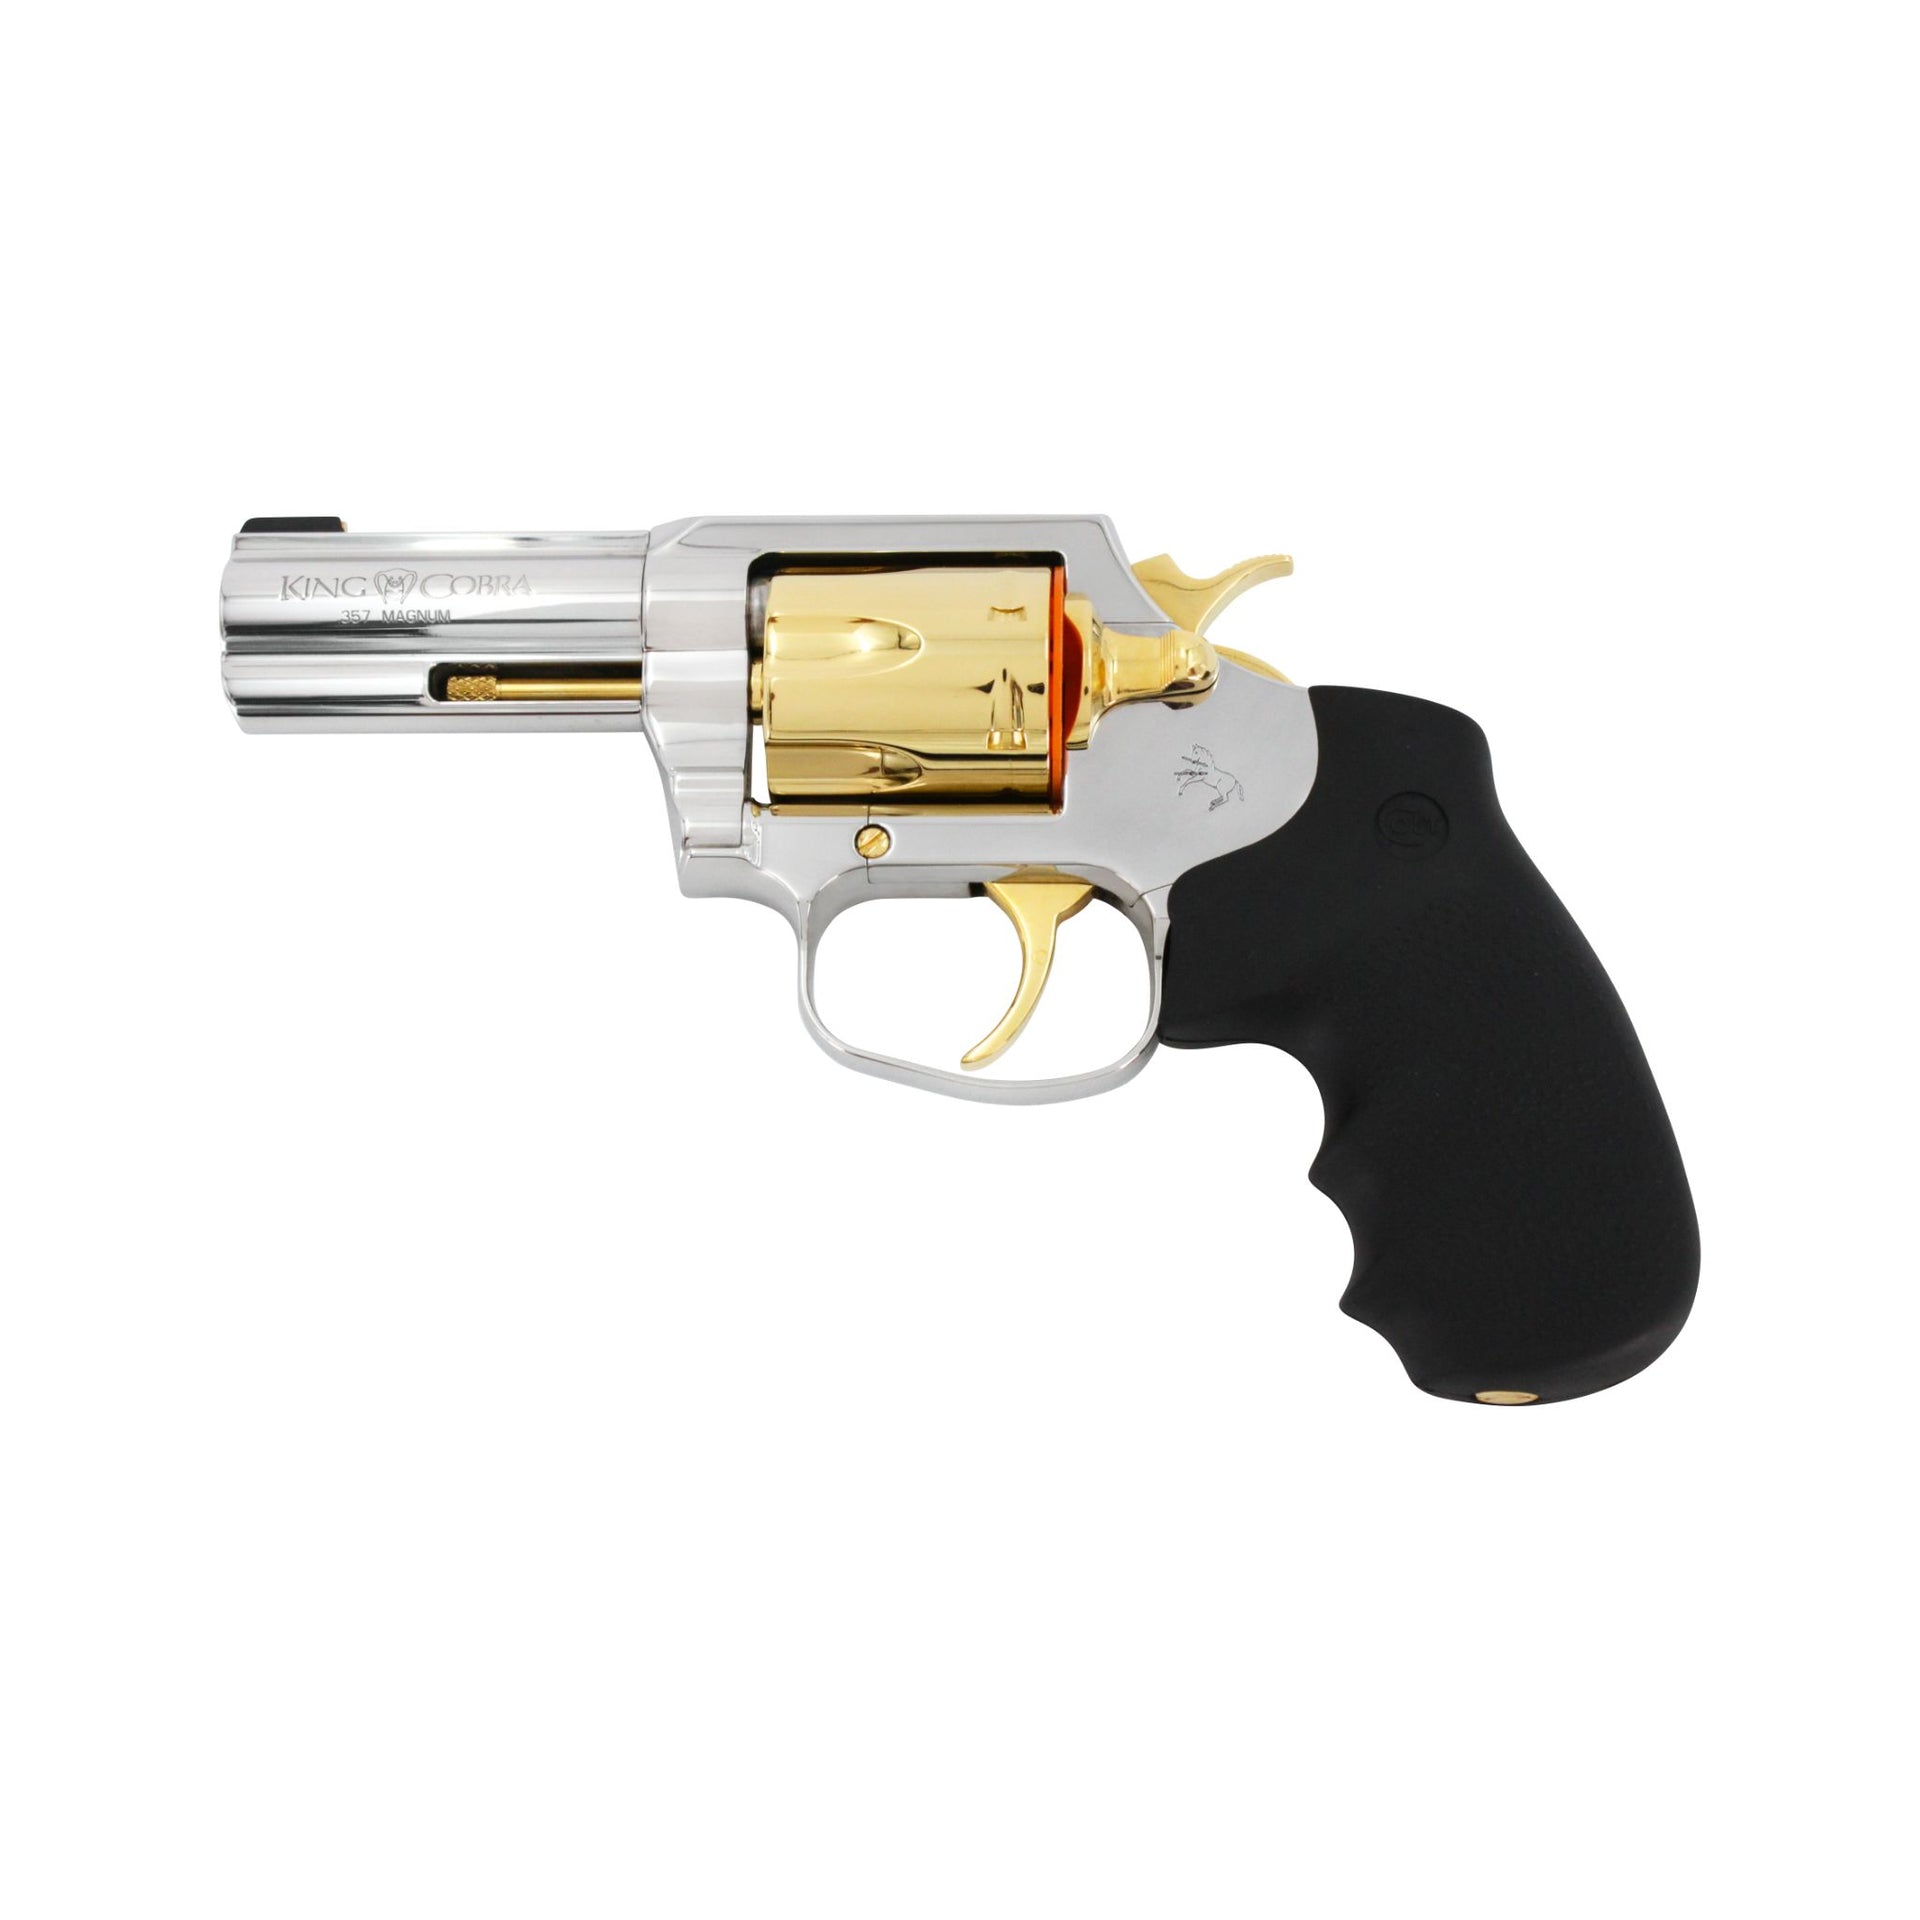 Colt King Cobra, 3", 357 Magnum, High Polish Stainless Steel, with 24K Gold Accents